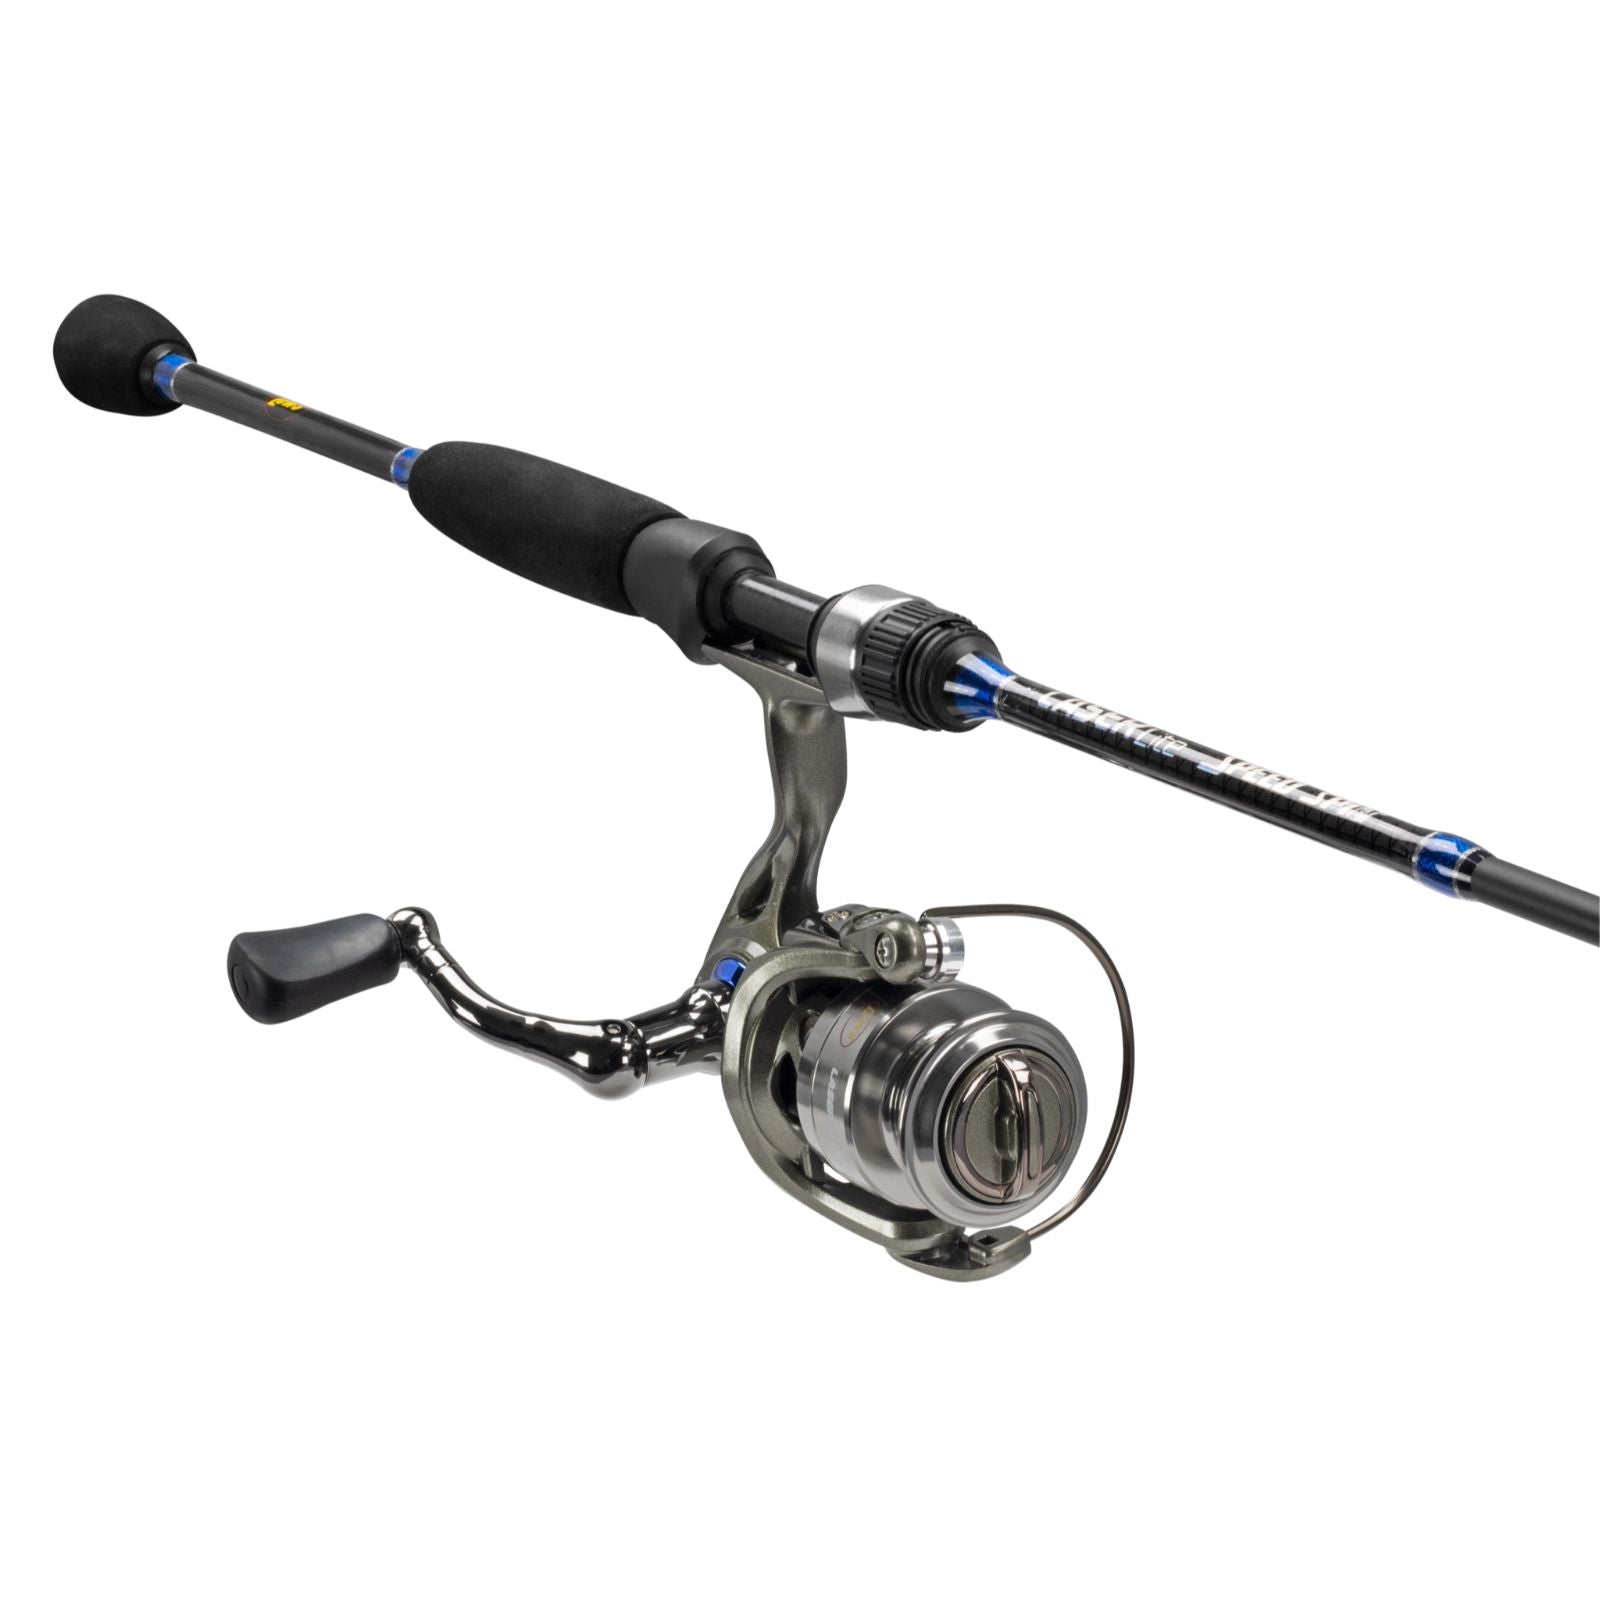 13 Fishing Ambition 4ft6in SP Combo 1000 Reel Fast Crayon